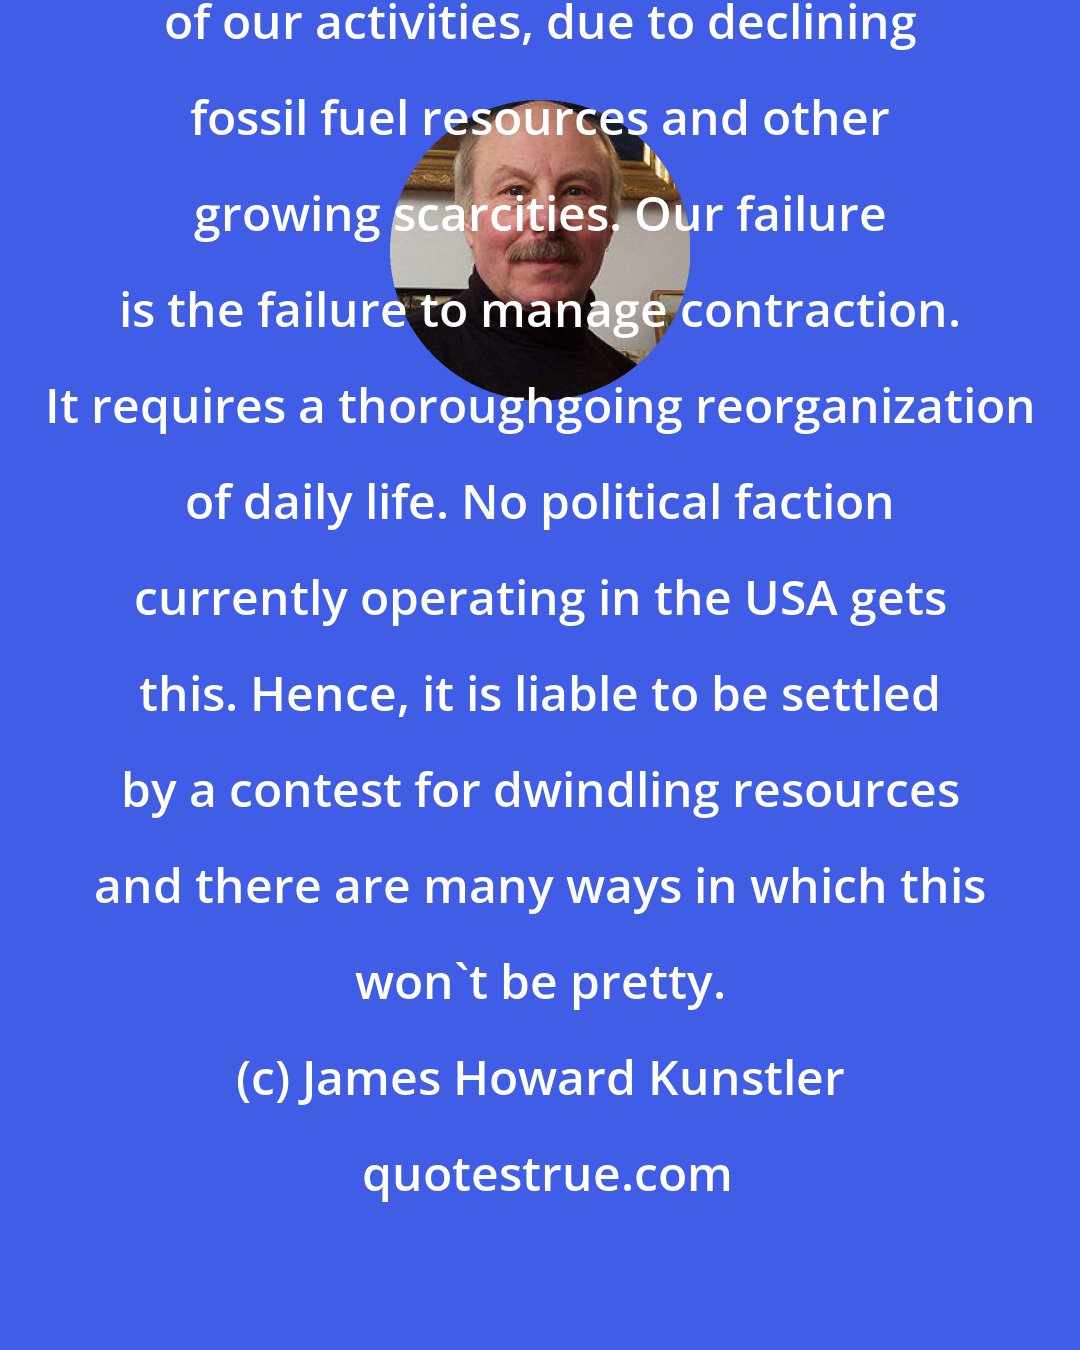 James Howard Kunstler: What we face is a comprehensive contraction of our activities, due to declining fossil fuel resources and other growing scarcities. Our failure is the failure to manage contraction. It requires a thoroughgoing reorganization of daily life. No political faction currently operating in the USA gets this. Hence, it is liable to be settled by a contest for dwindling resources and there are many ways in which this won't be pretty.